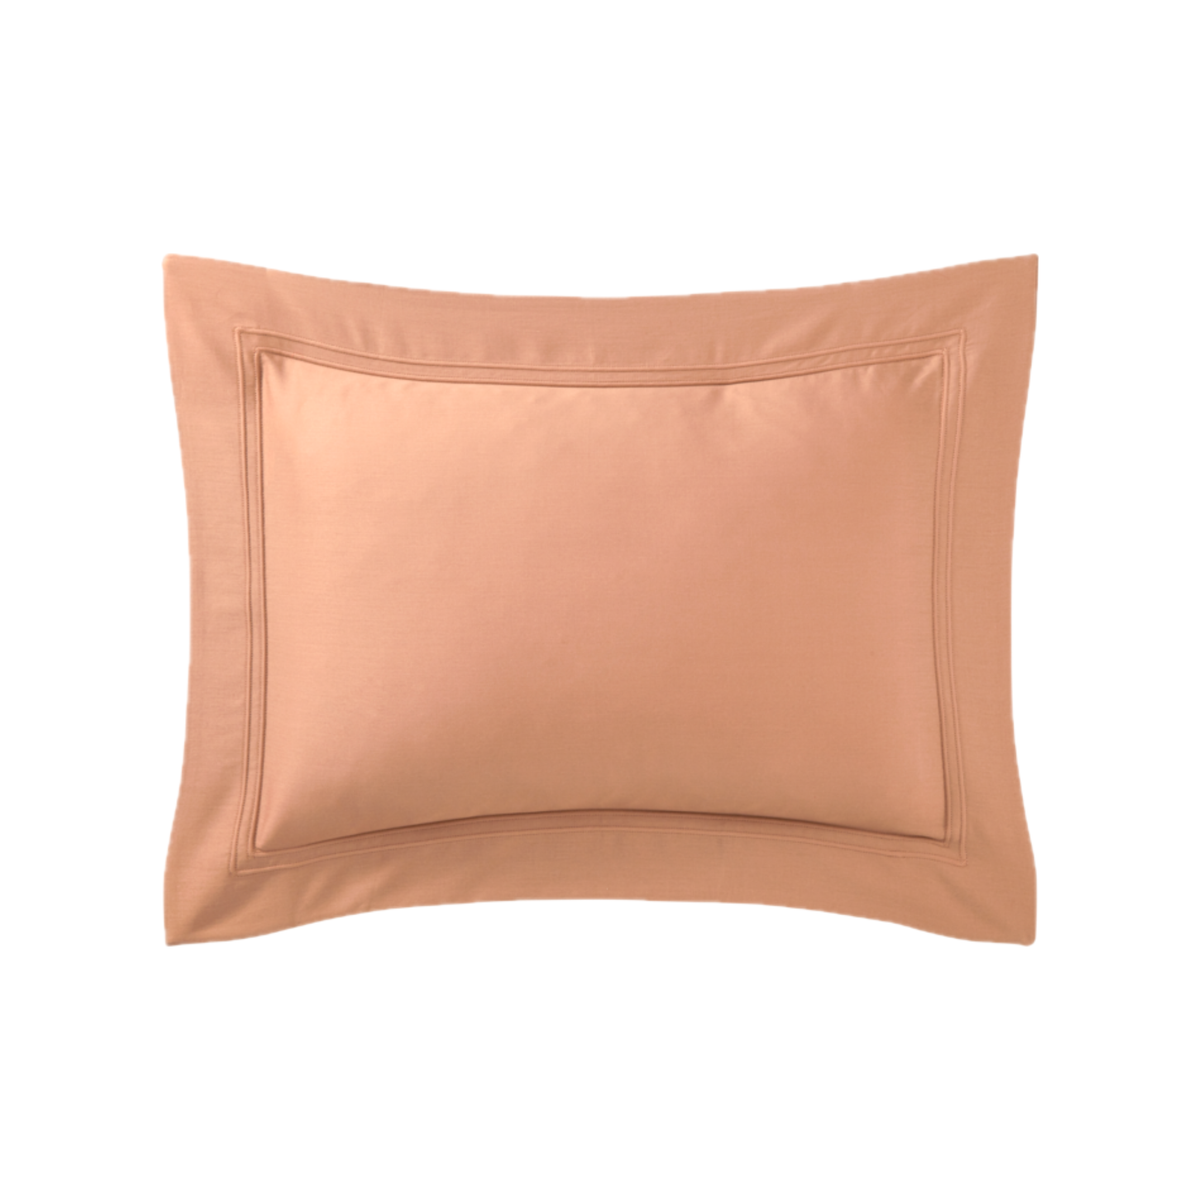 Boudoir Sham of Yves Delorme Triomphe Bedding in Sienna Color